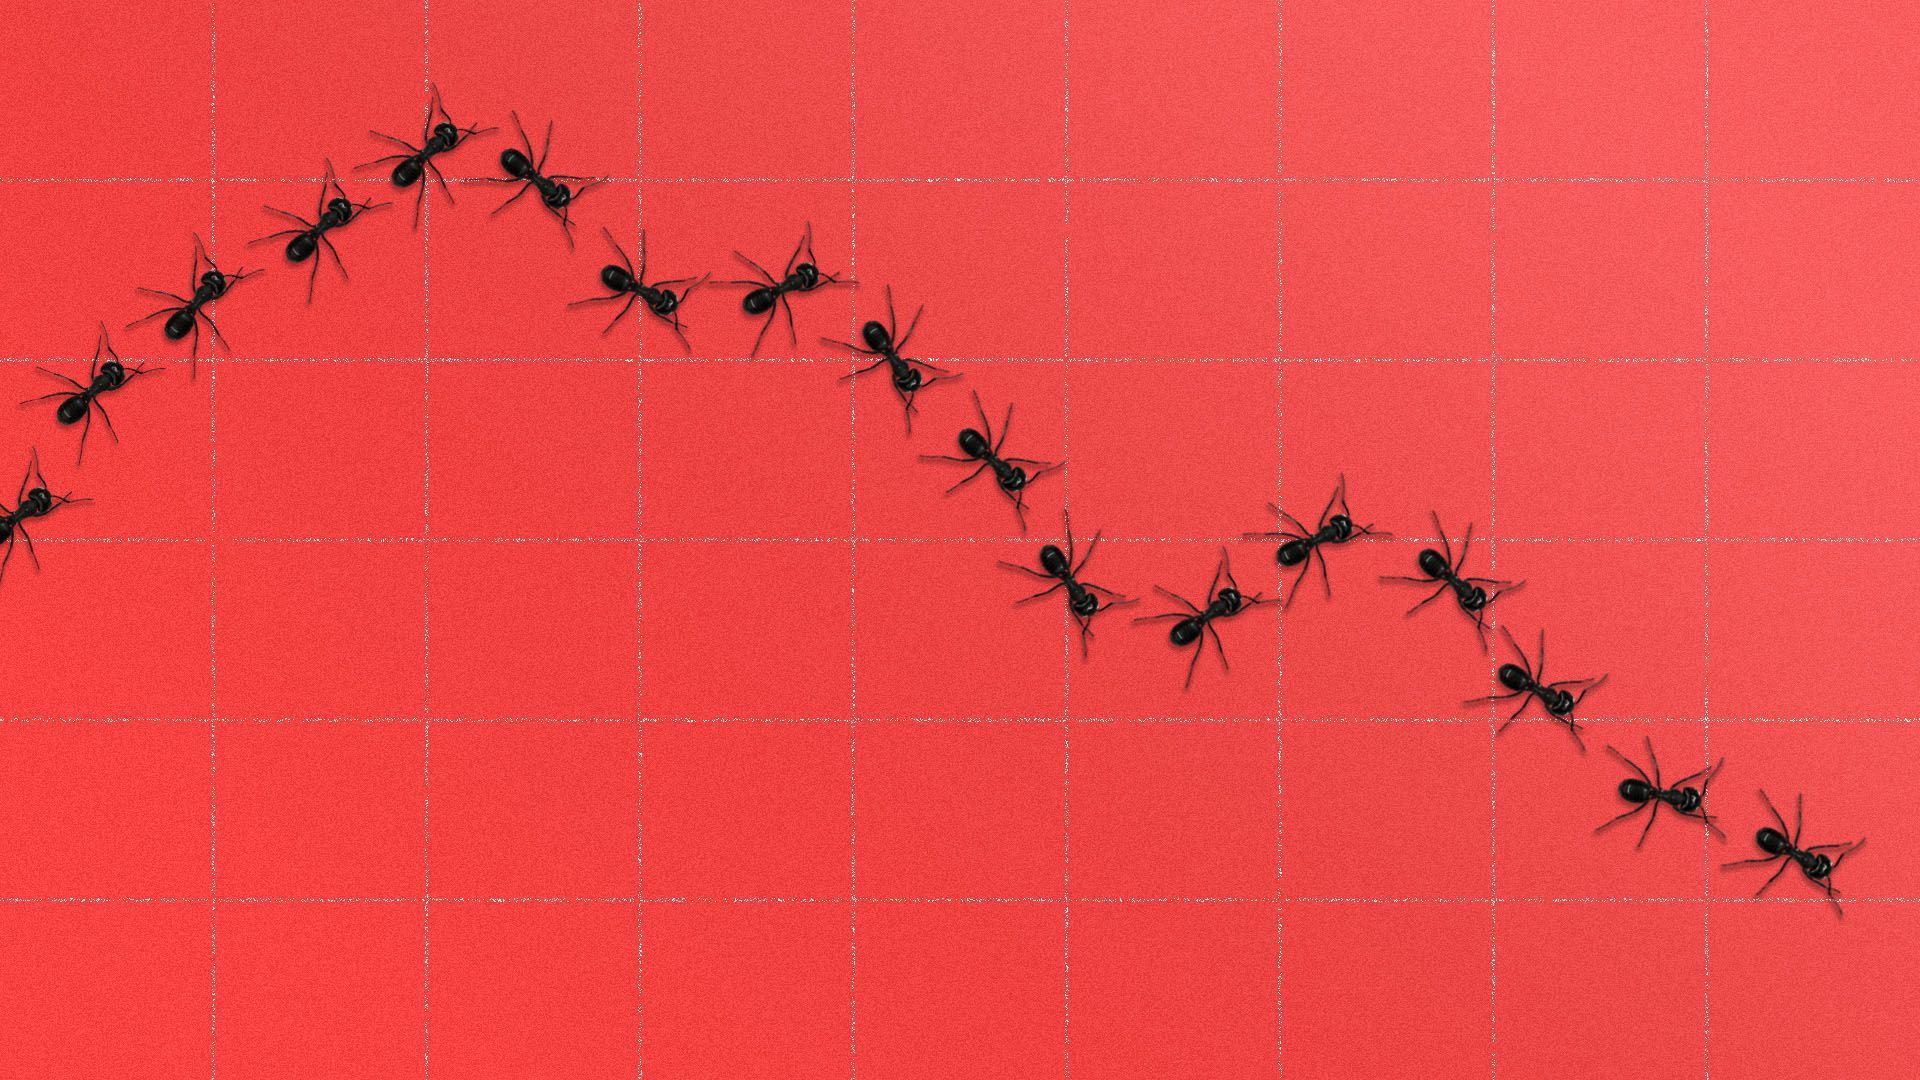 Illustration of a row of ants 